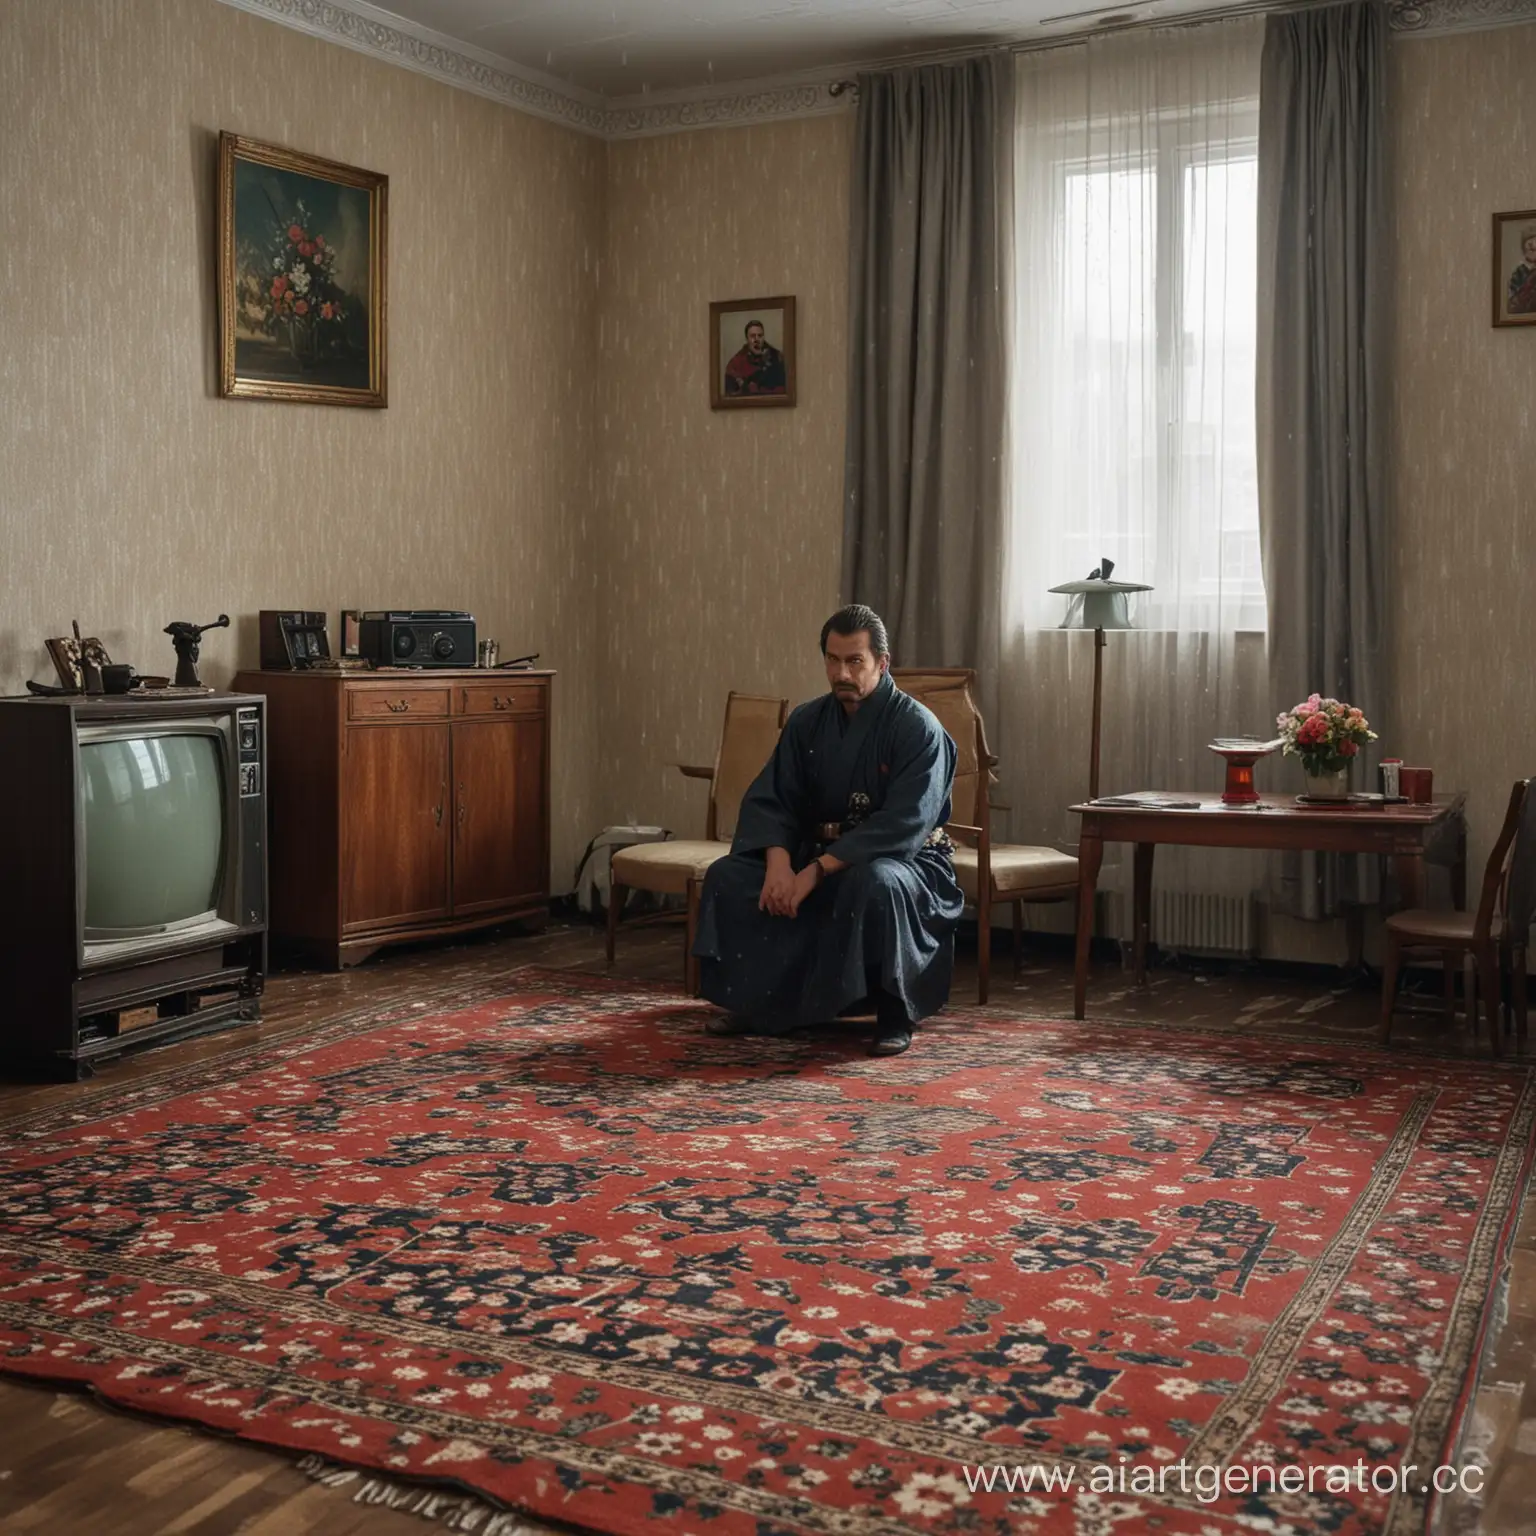 Samurai-Sitting-in-Soviet-Apartment-Khrushchevka-Amid-Rainy-Day-with-Television-in-Background